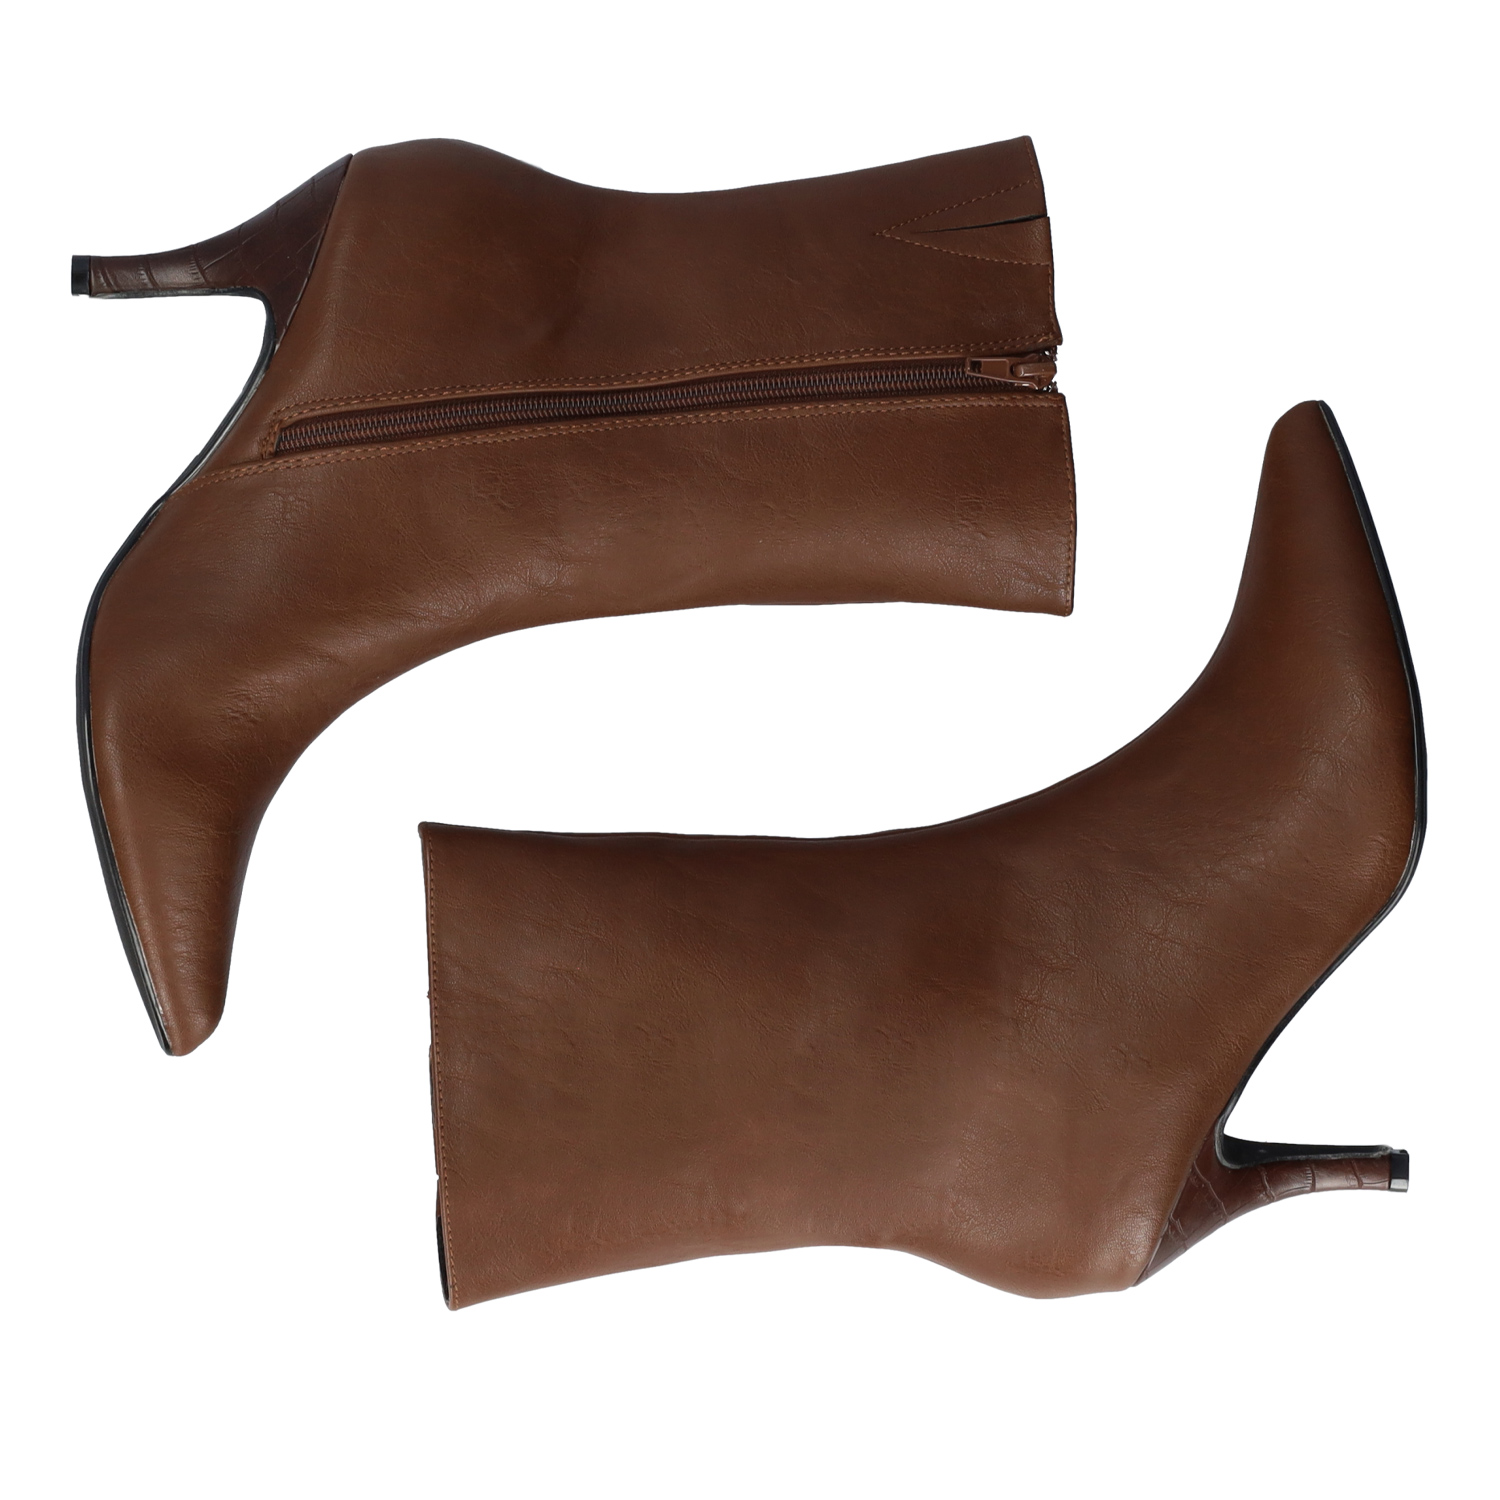 Pointed toed high-top booties in brown faux leather 